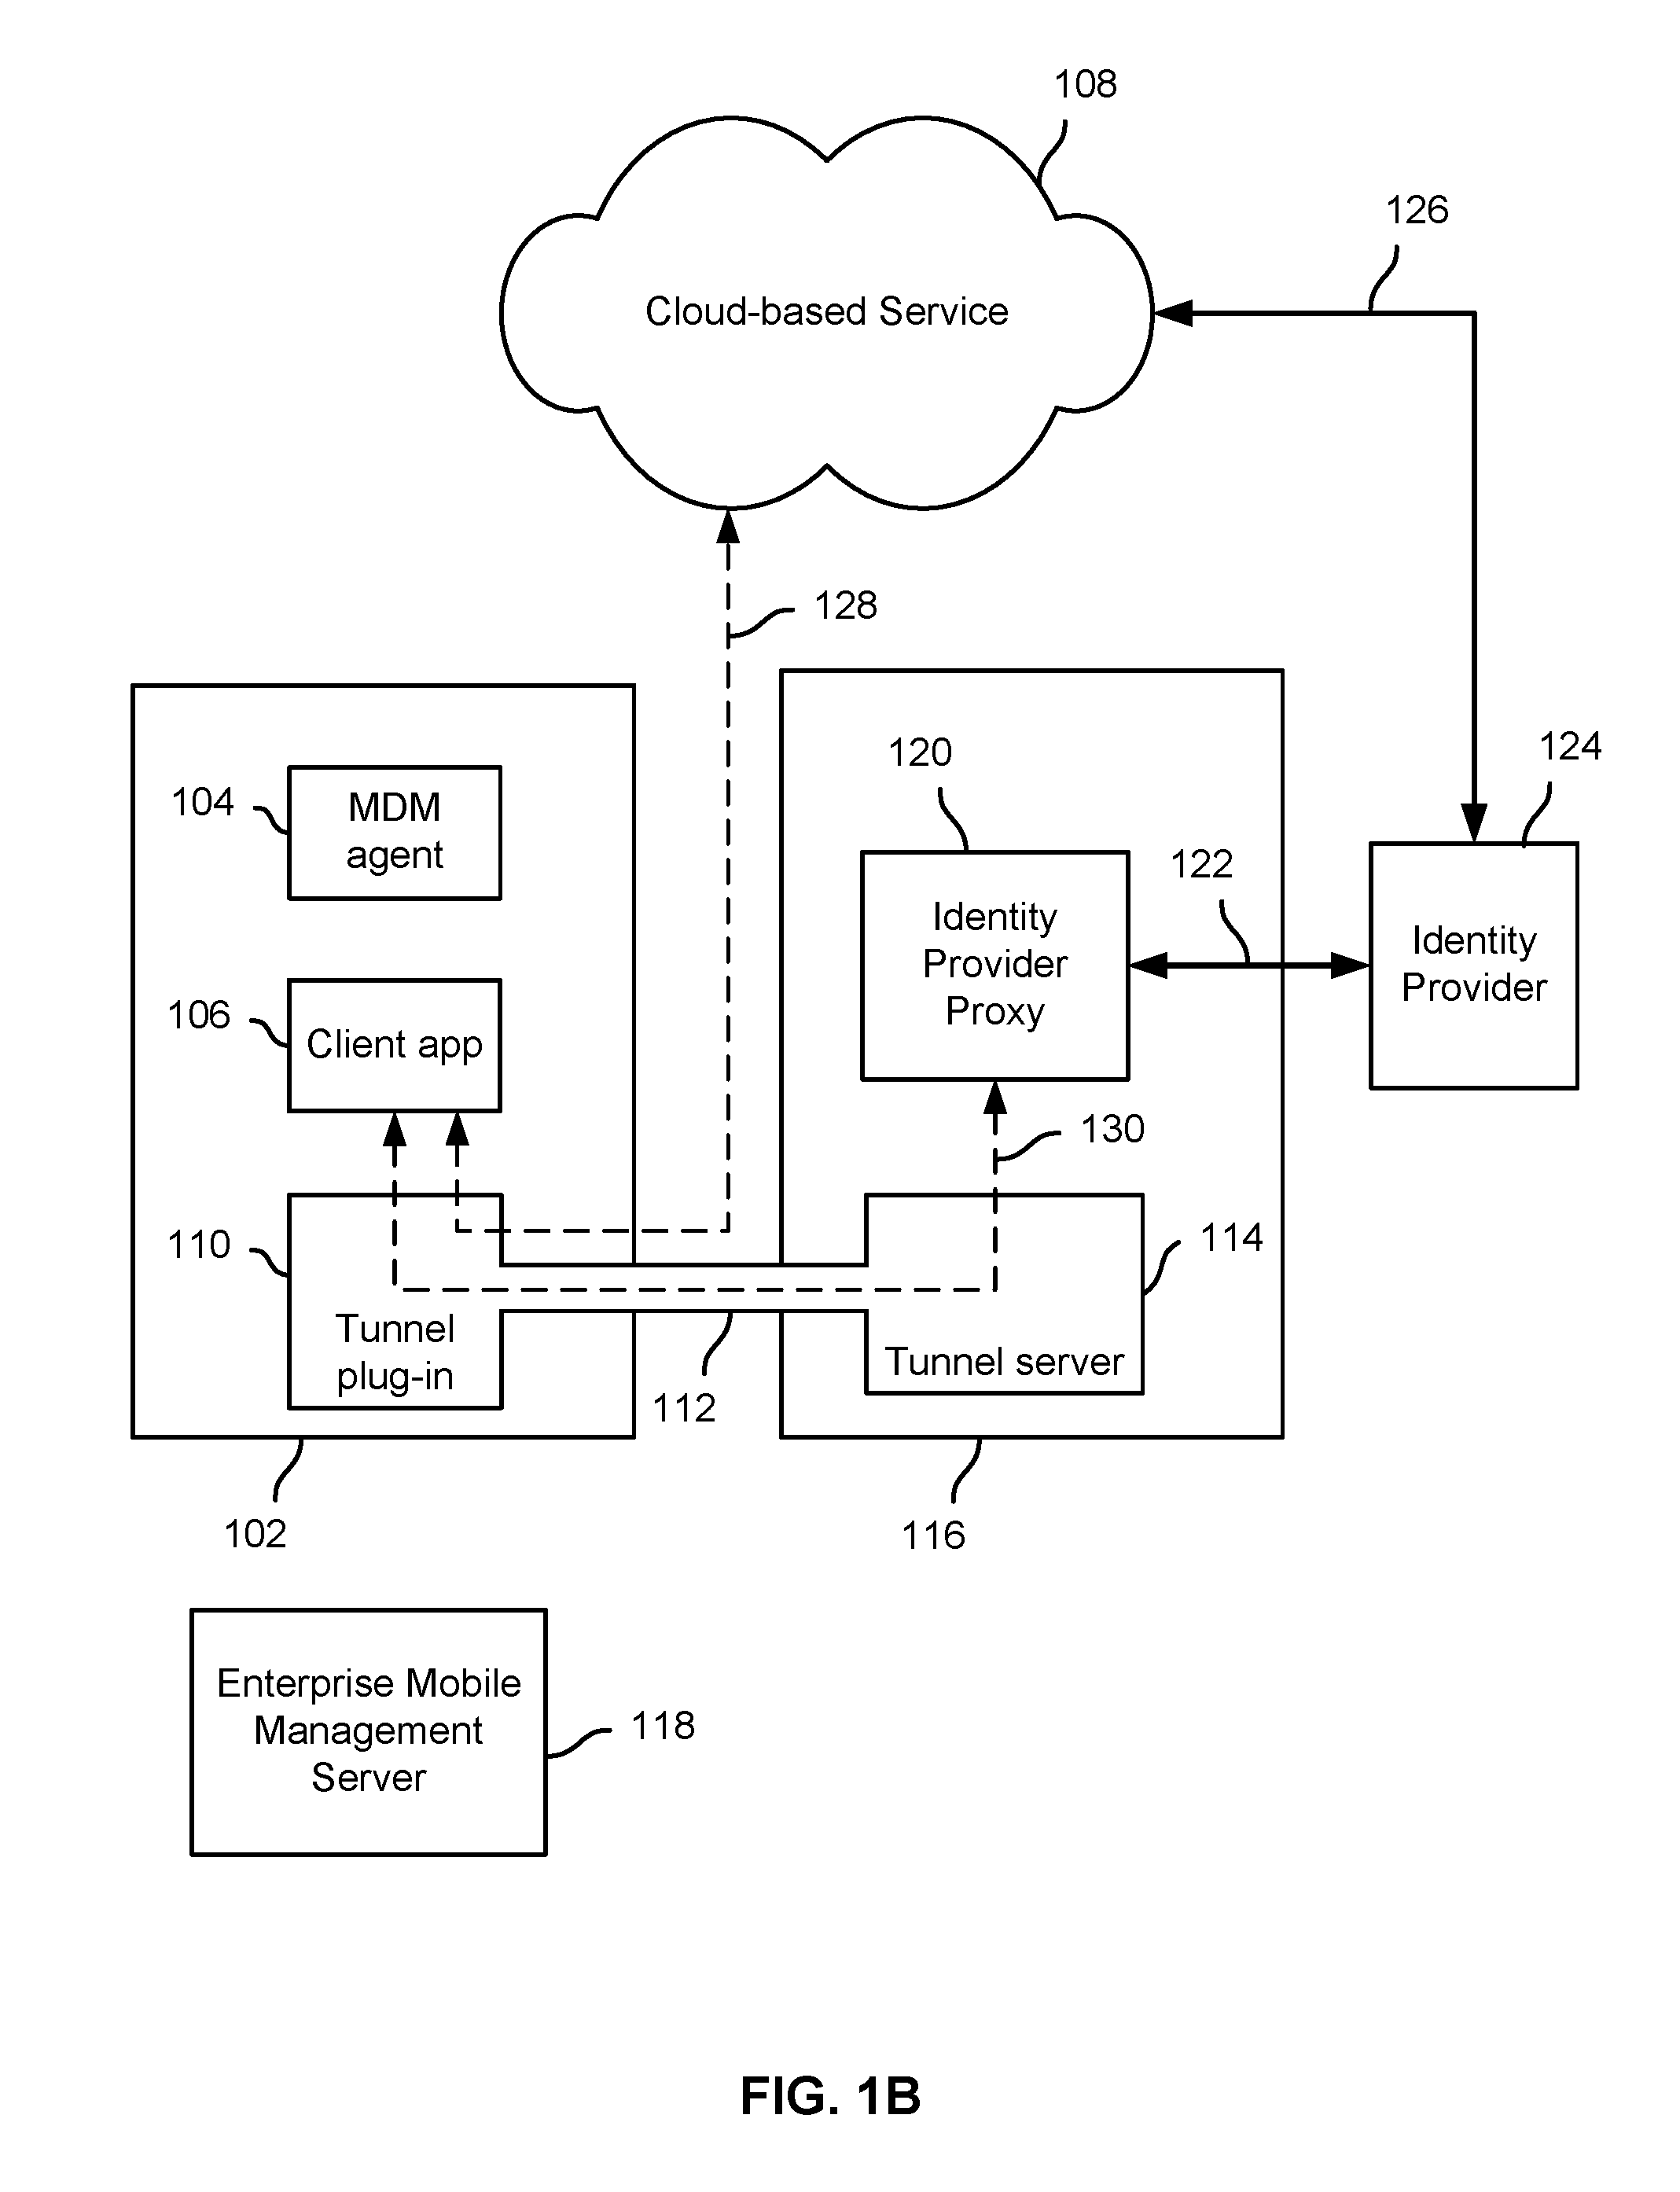 Identity proxy to provide access control and single sign on